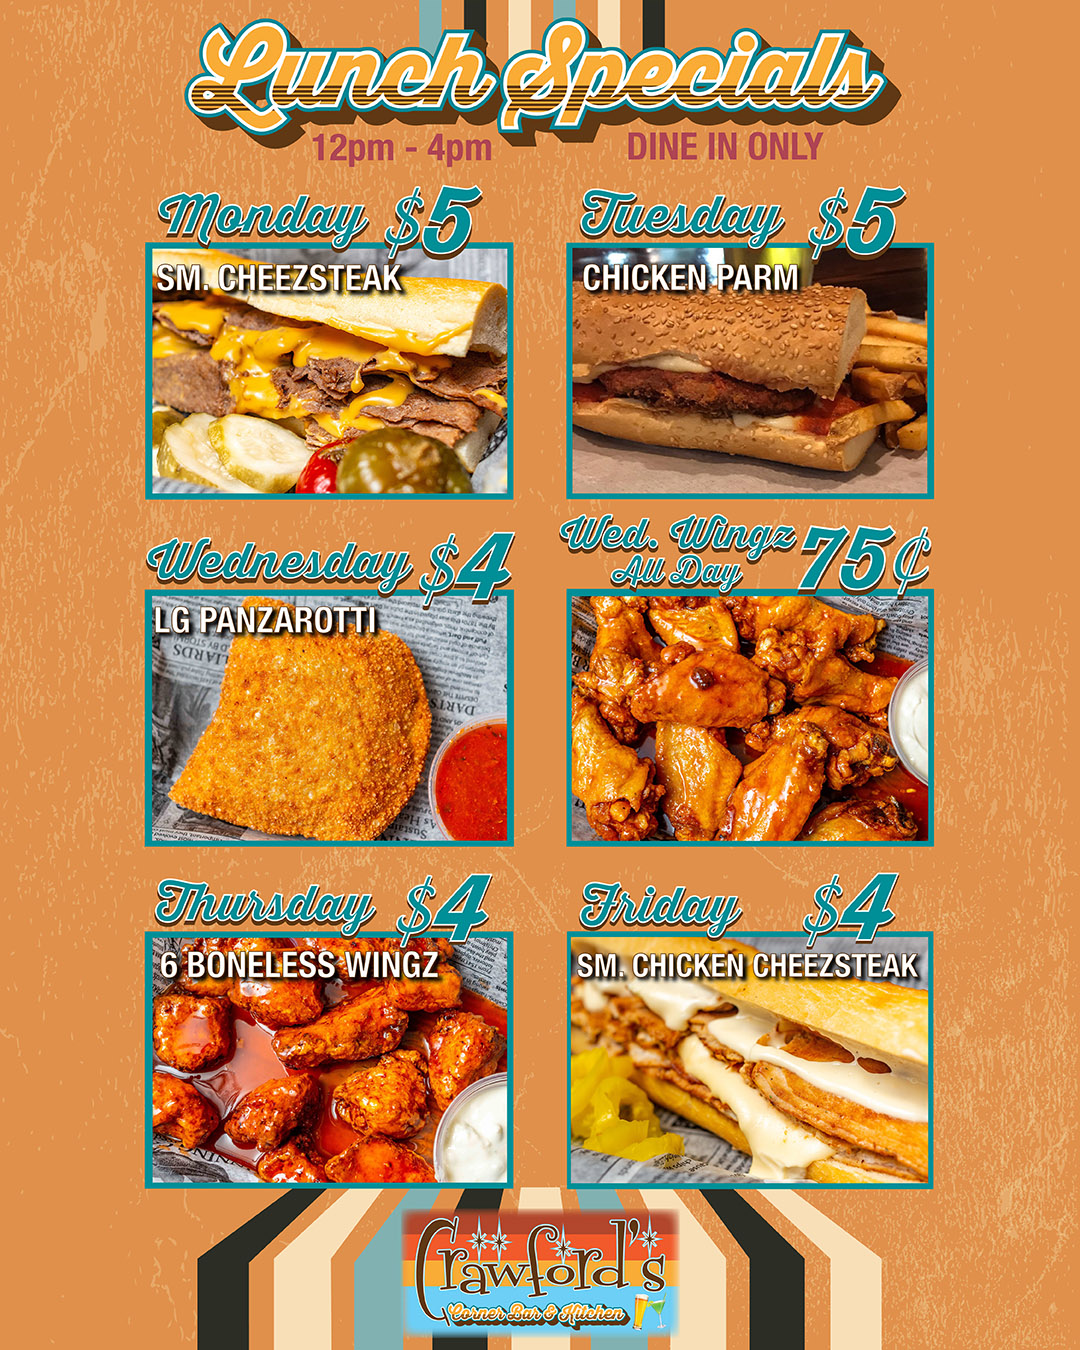 A flyer for lunch specials.